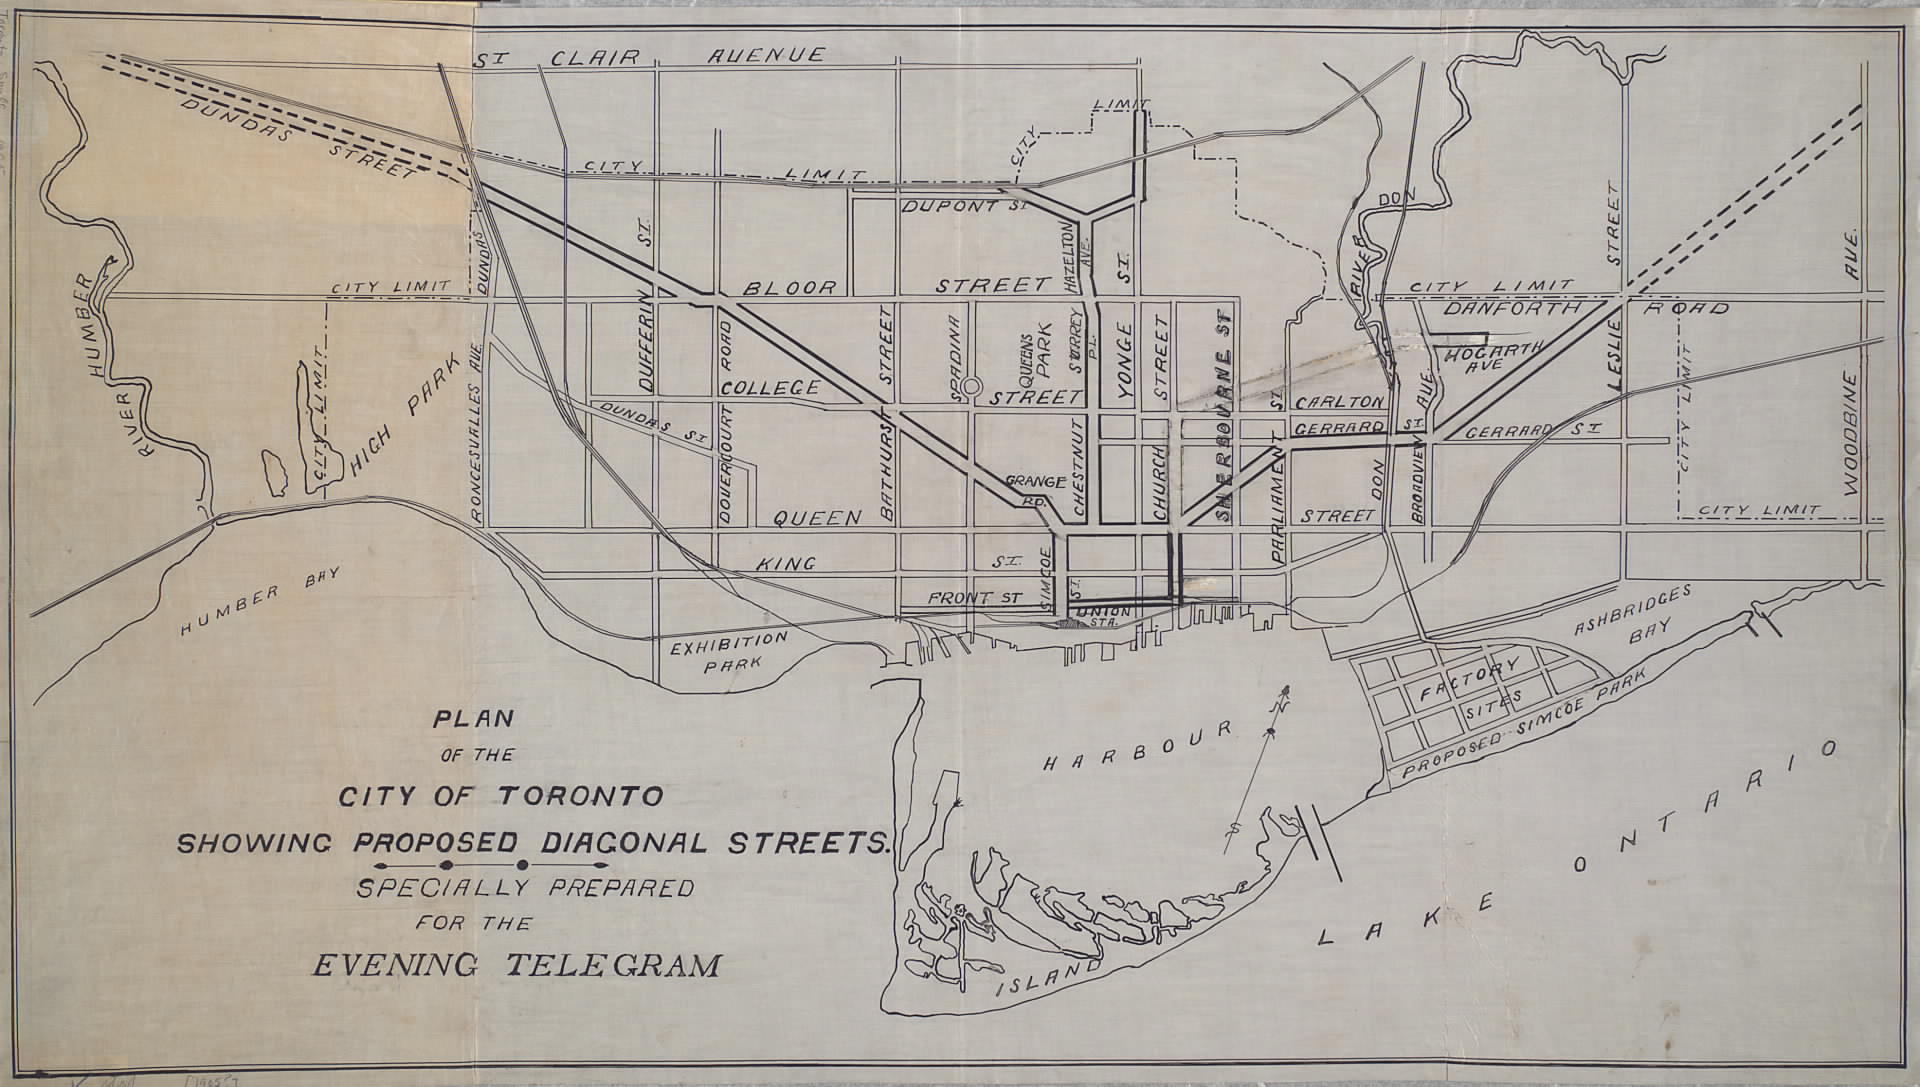 1905 - Plan of the City of Toronto showing proposed diagonal streets